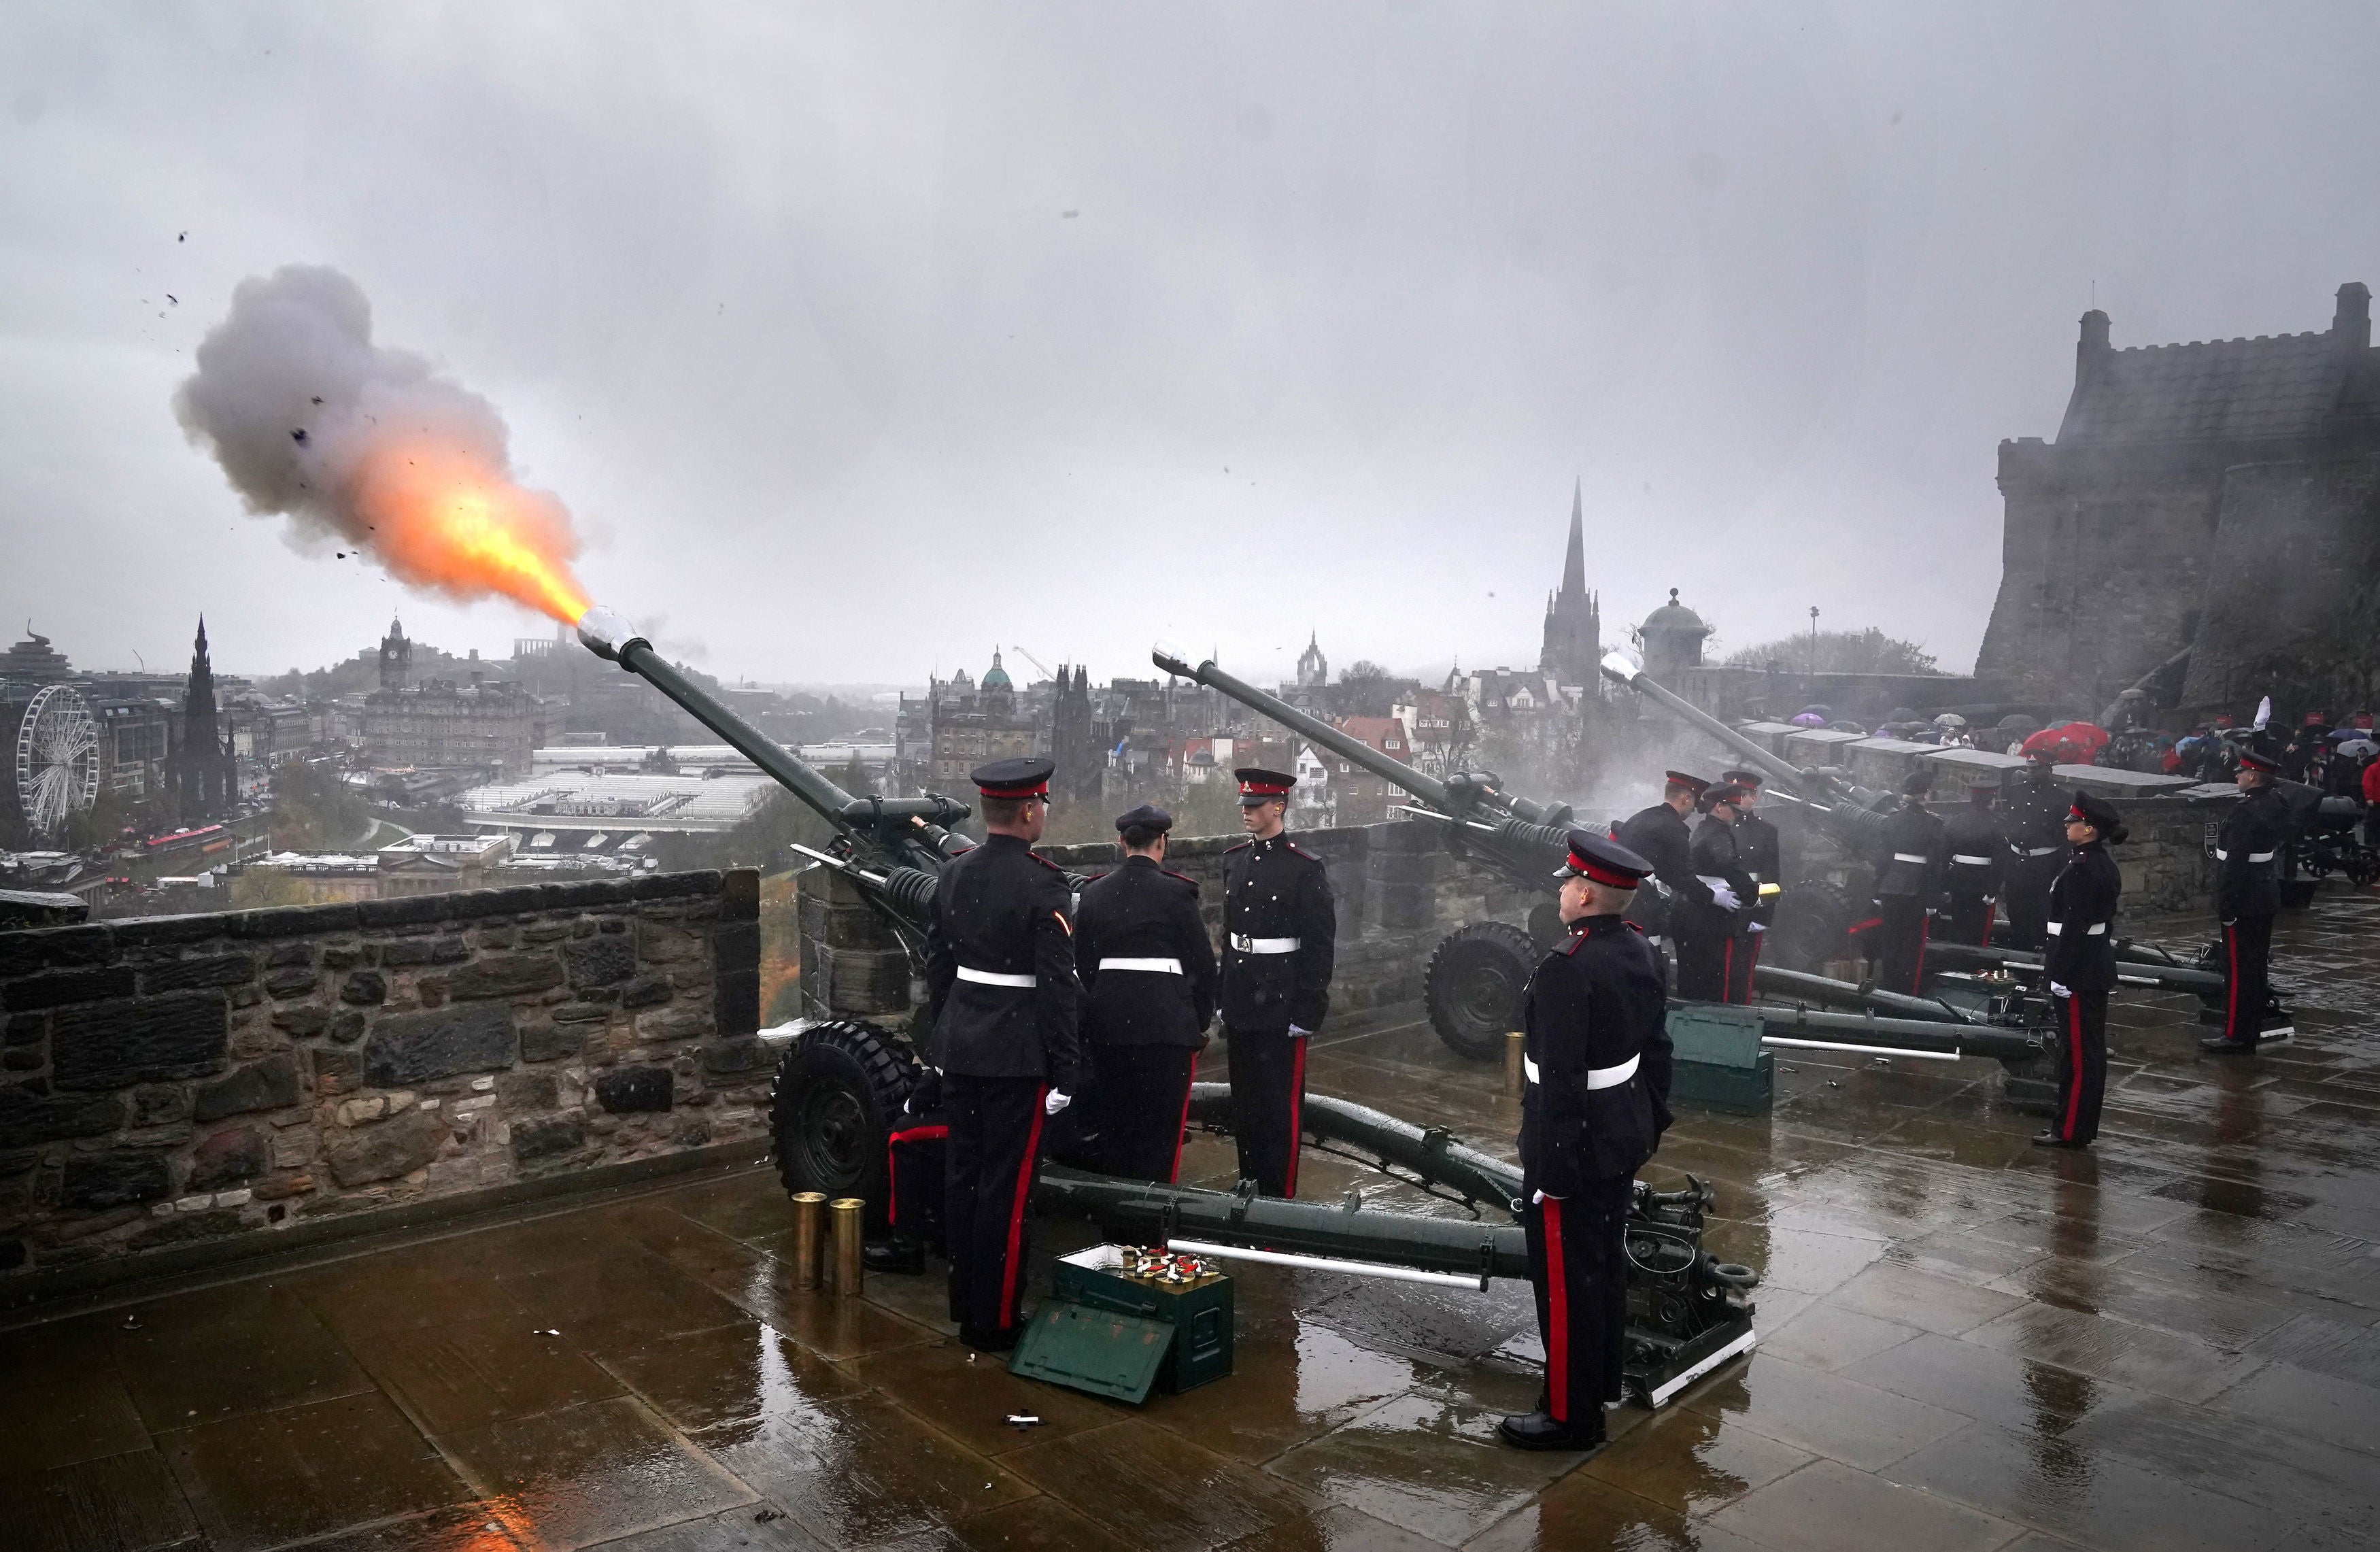 The King’s 75th birthday was marked at Edinburgh Castle last November with a gun salute.